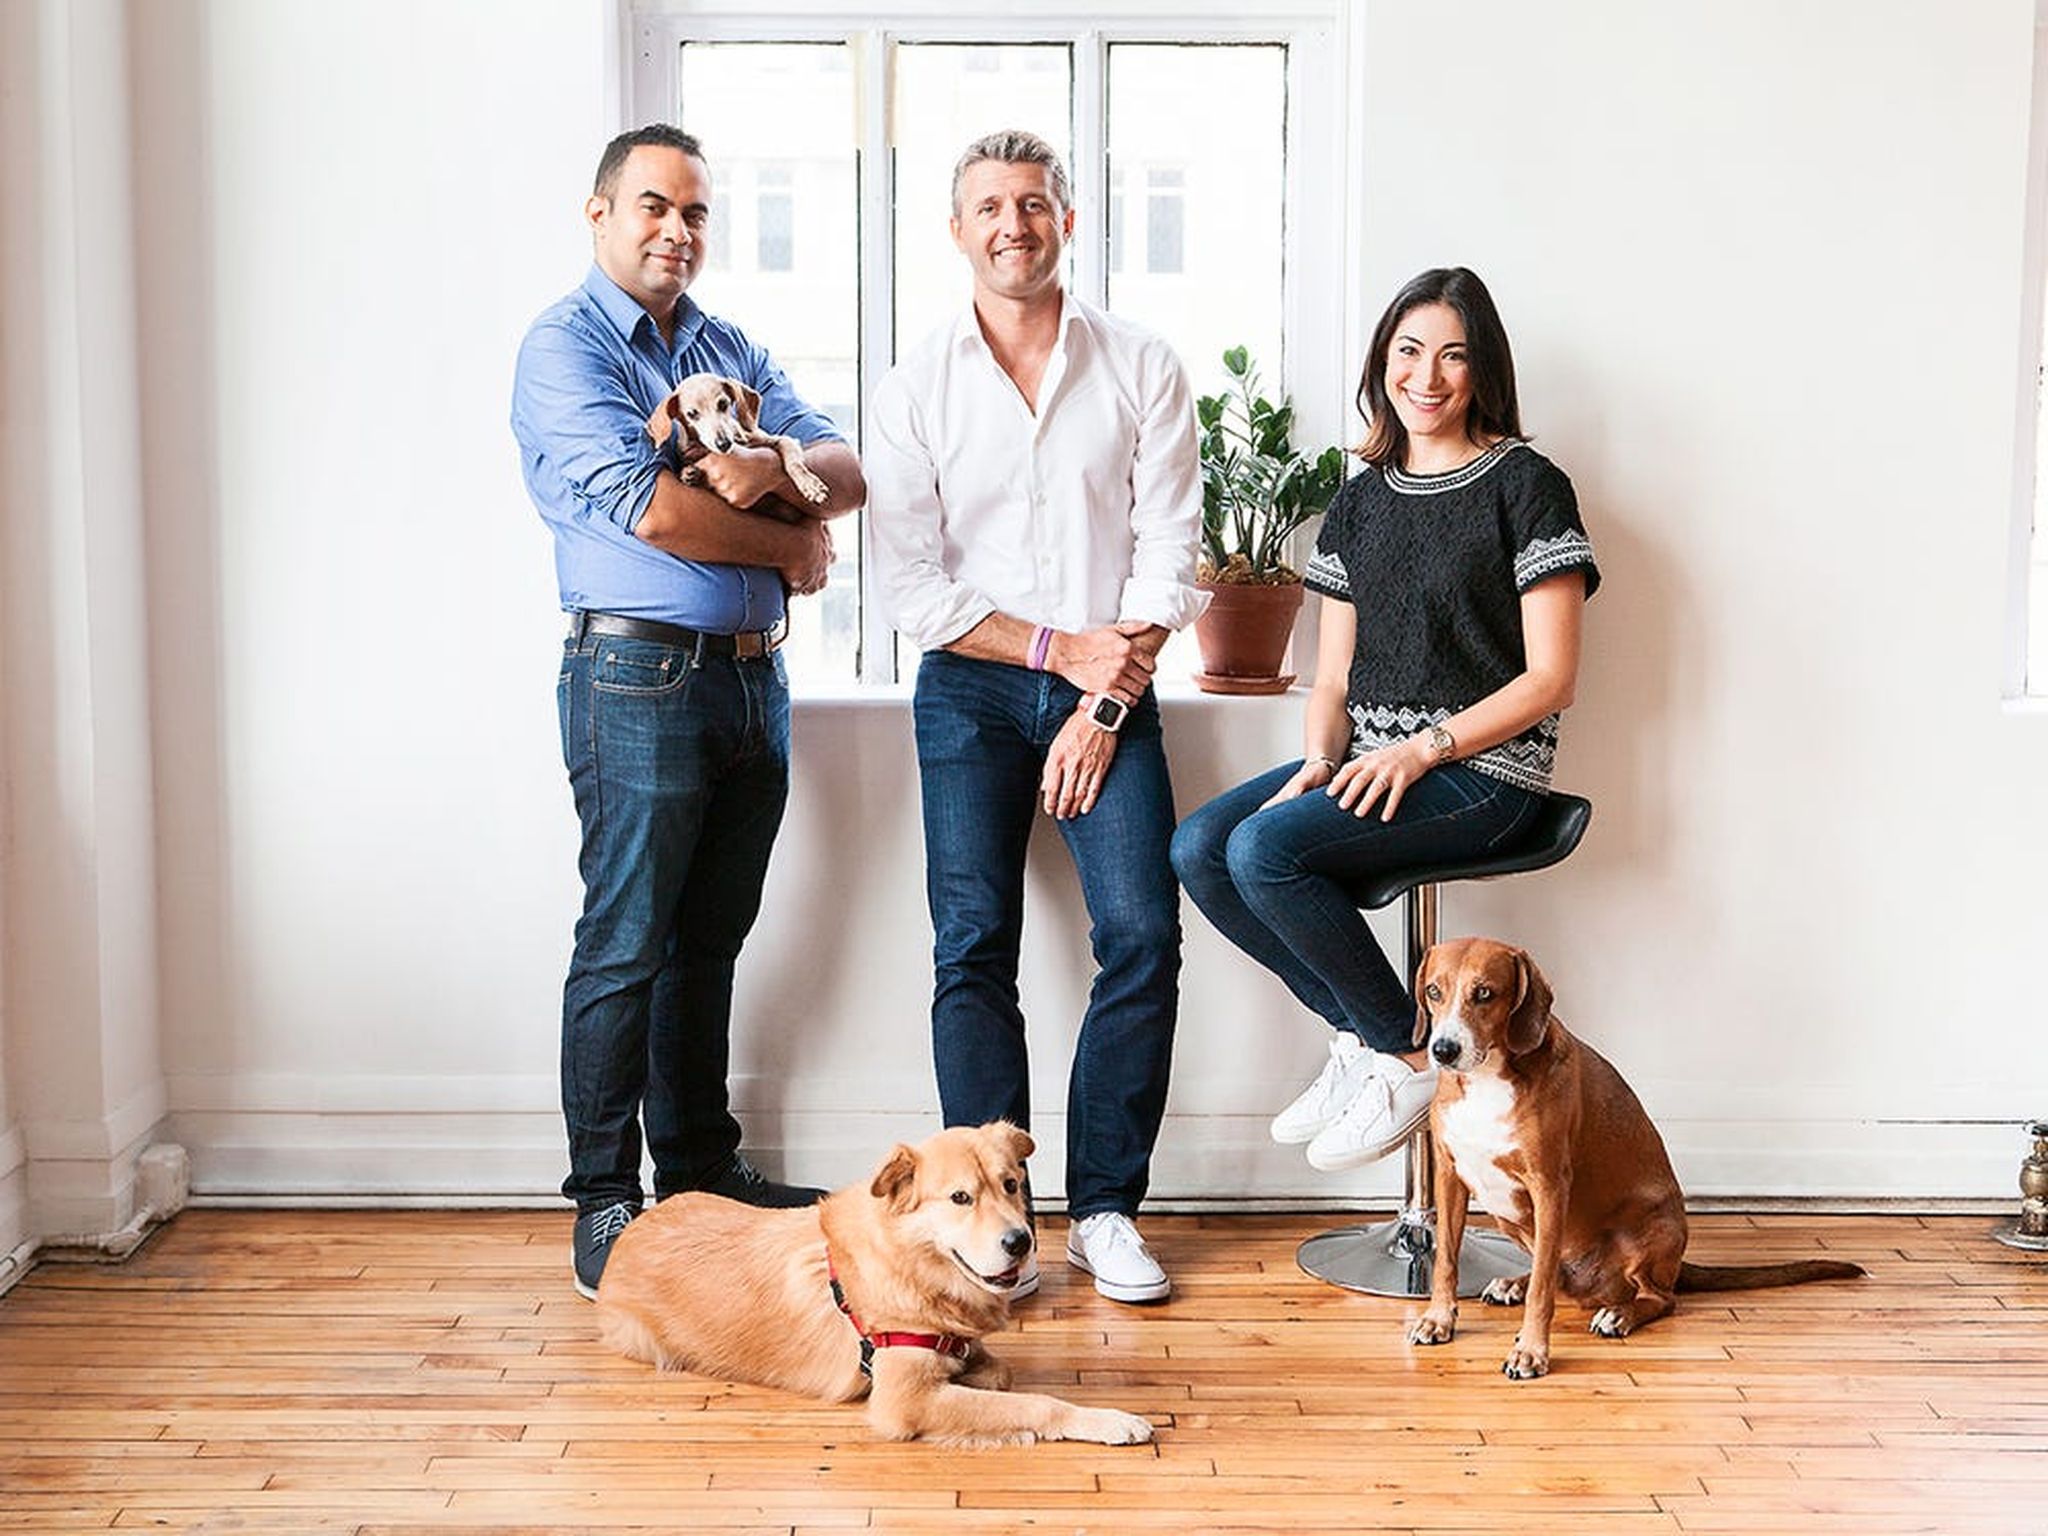 Ollie's Founders surrounded by dogs